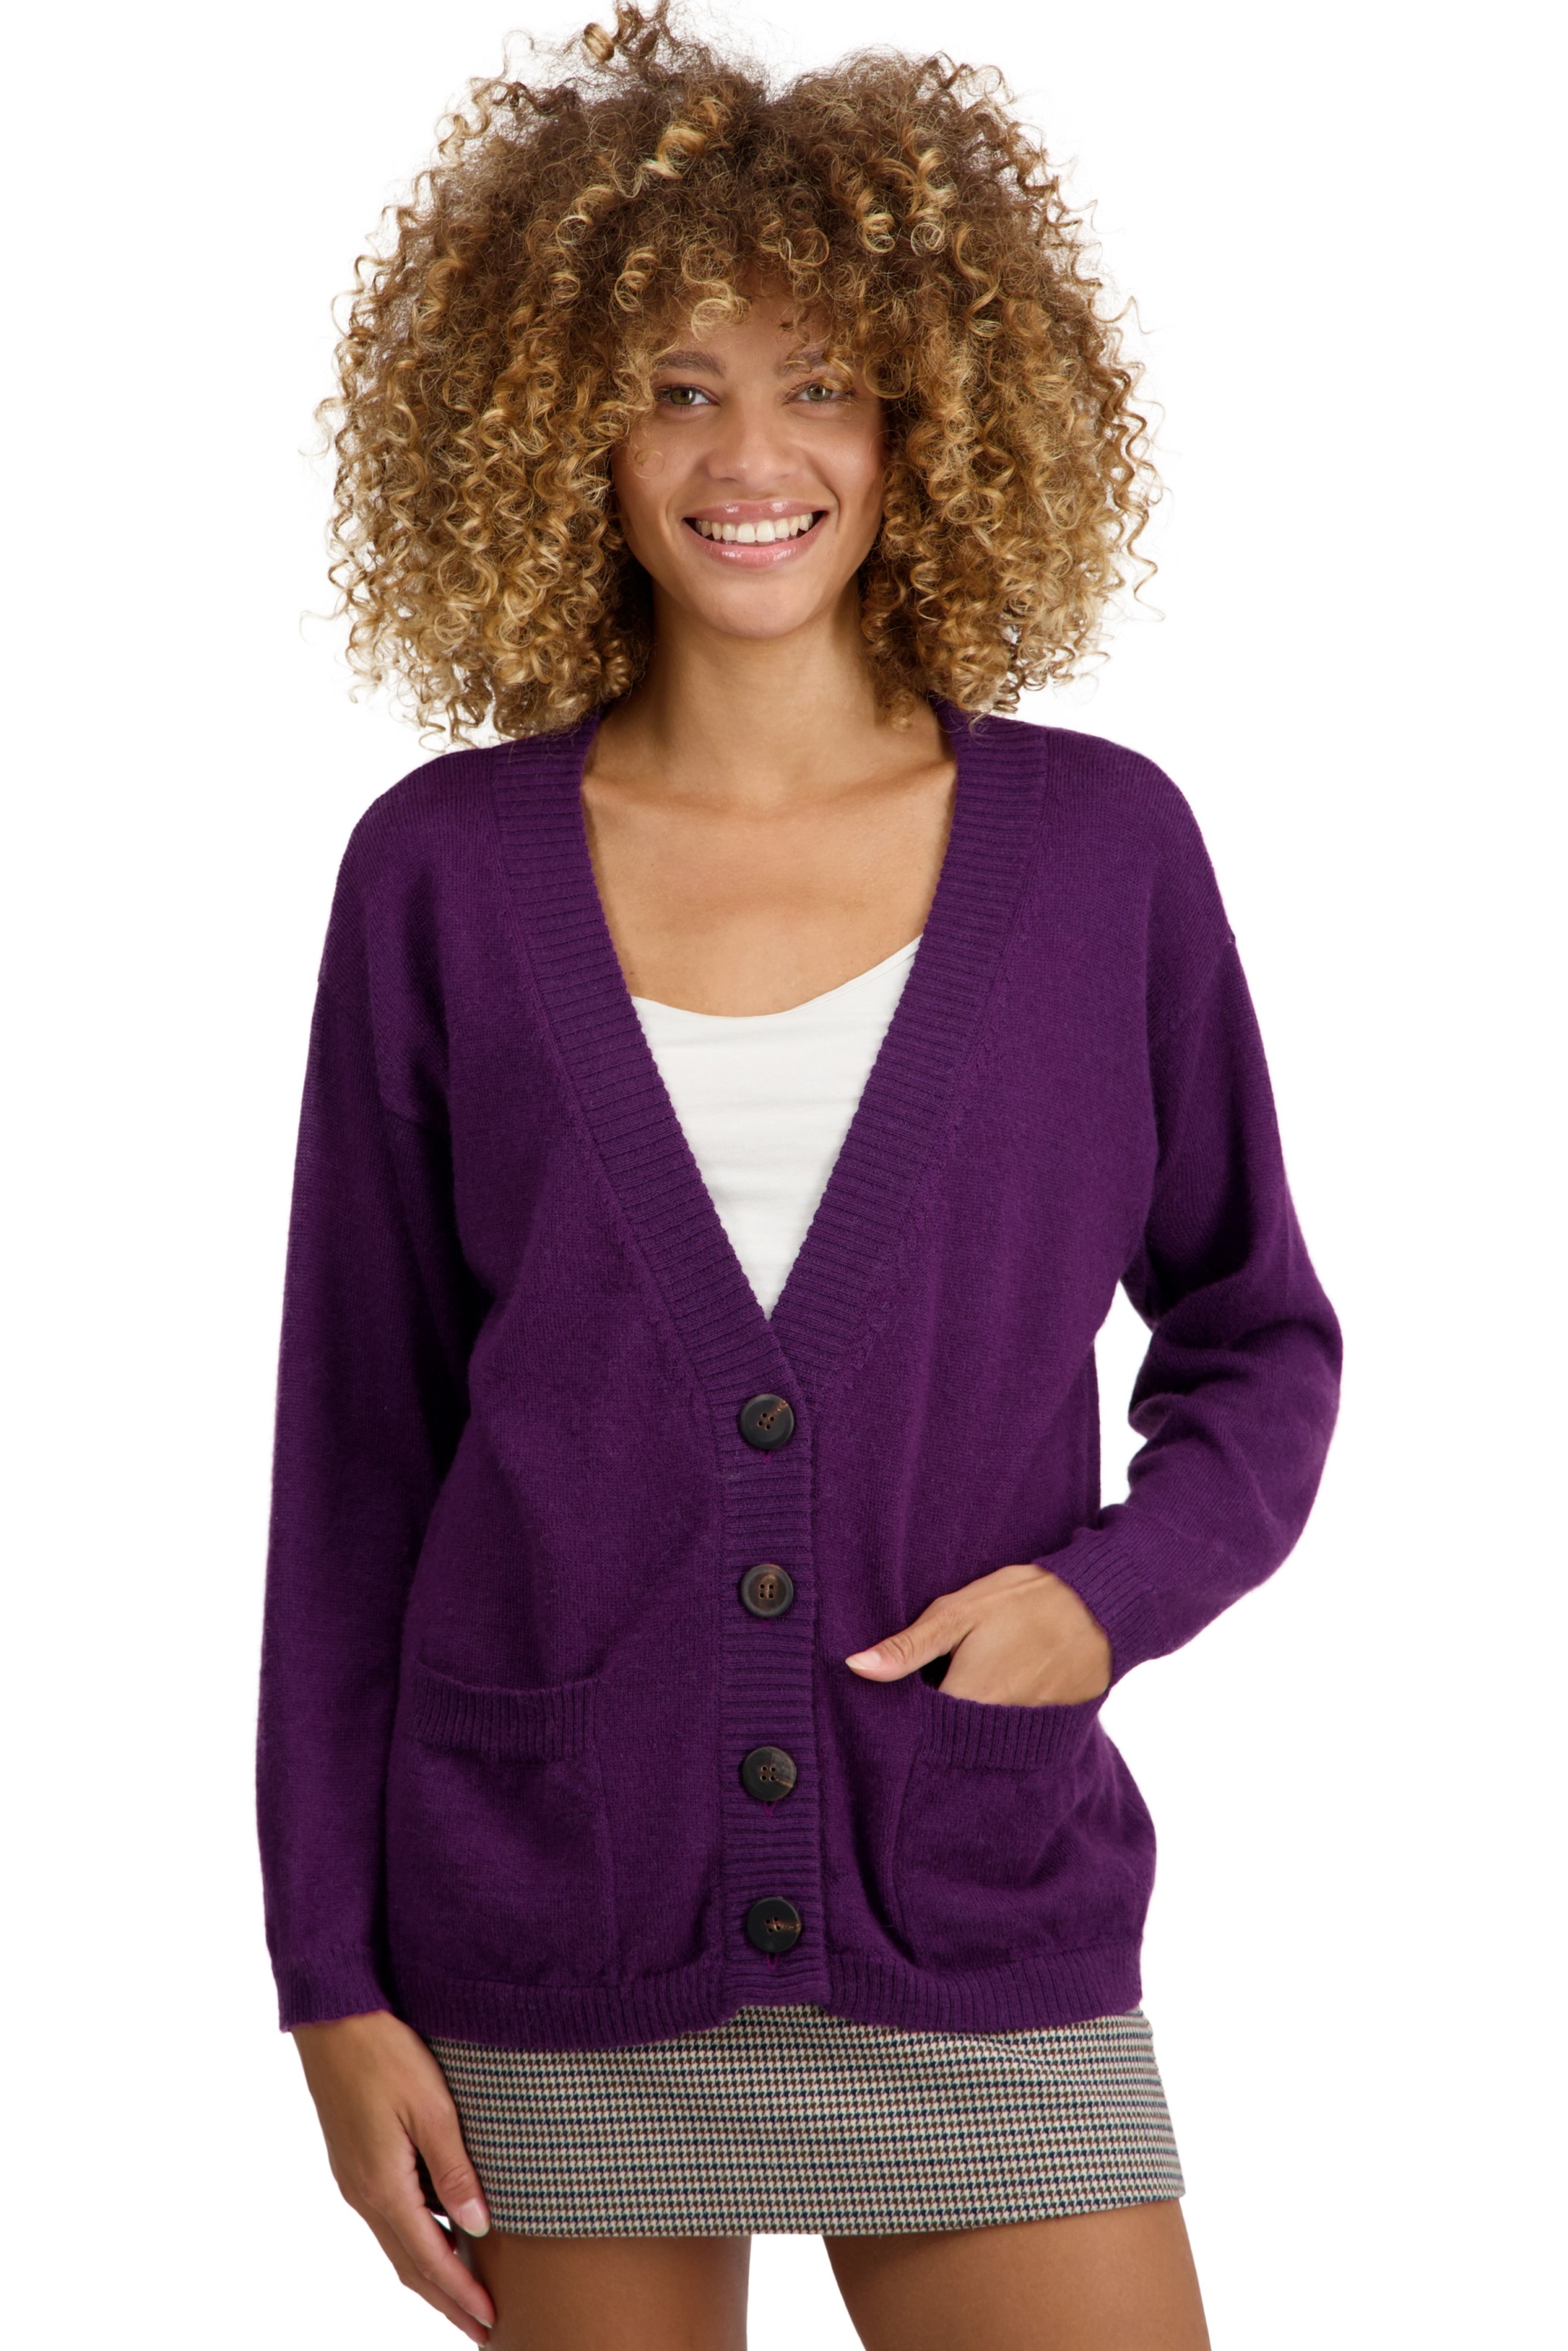 Baby Alpaga pull femme toulouse violet s